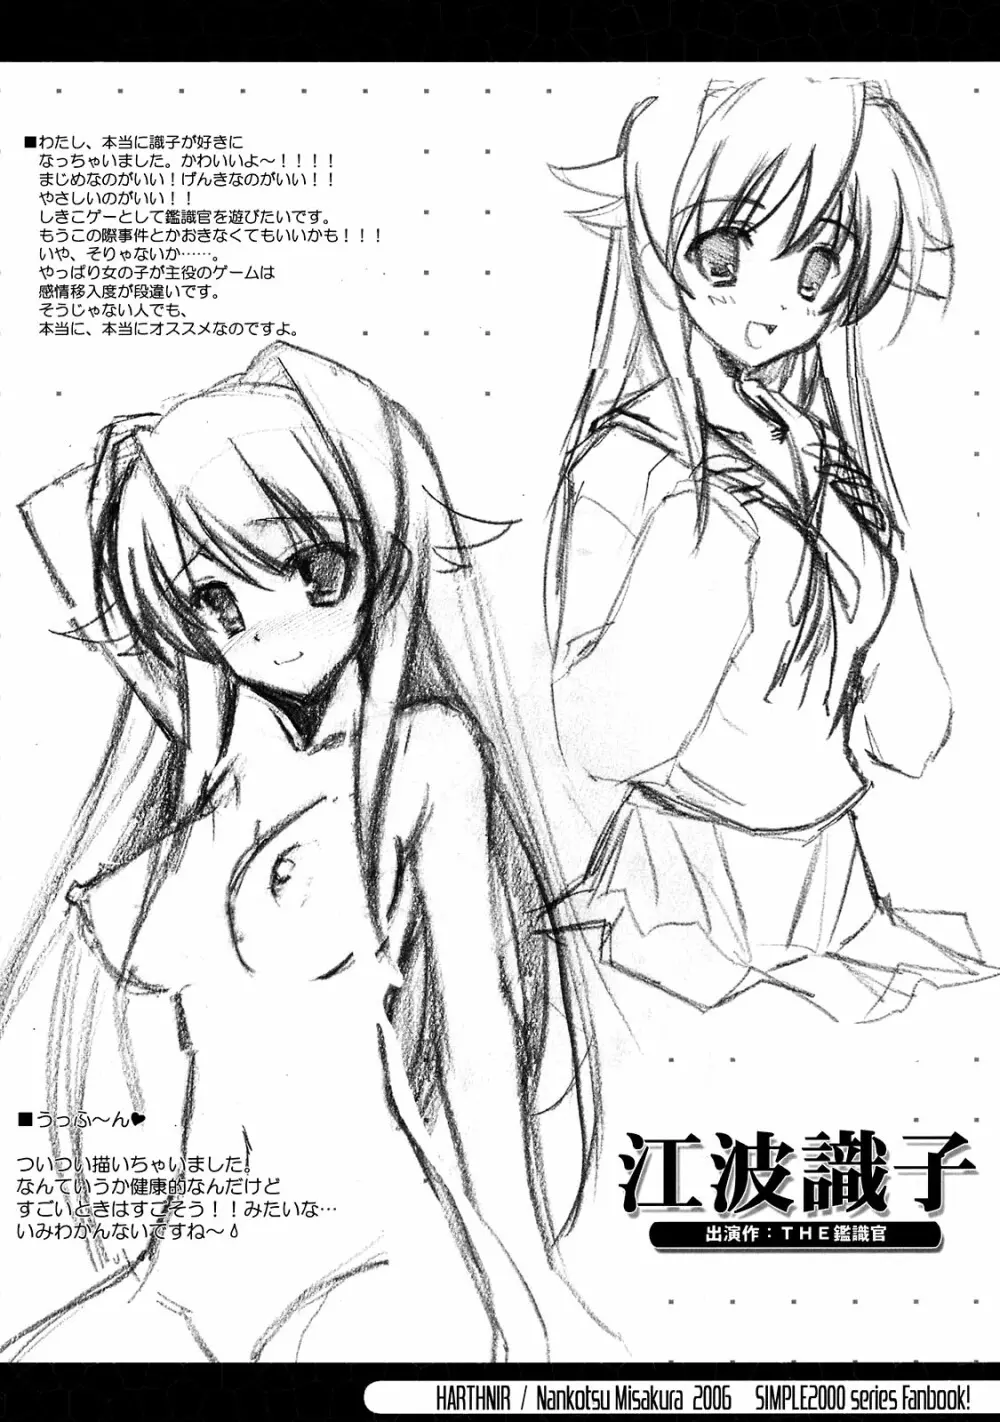 THE SIMPLE ギャル萌え同人誌 Illustration Side Page.20